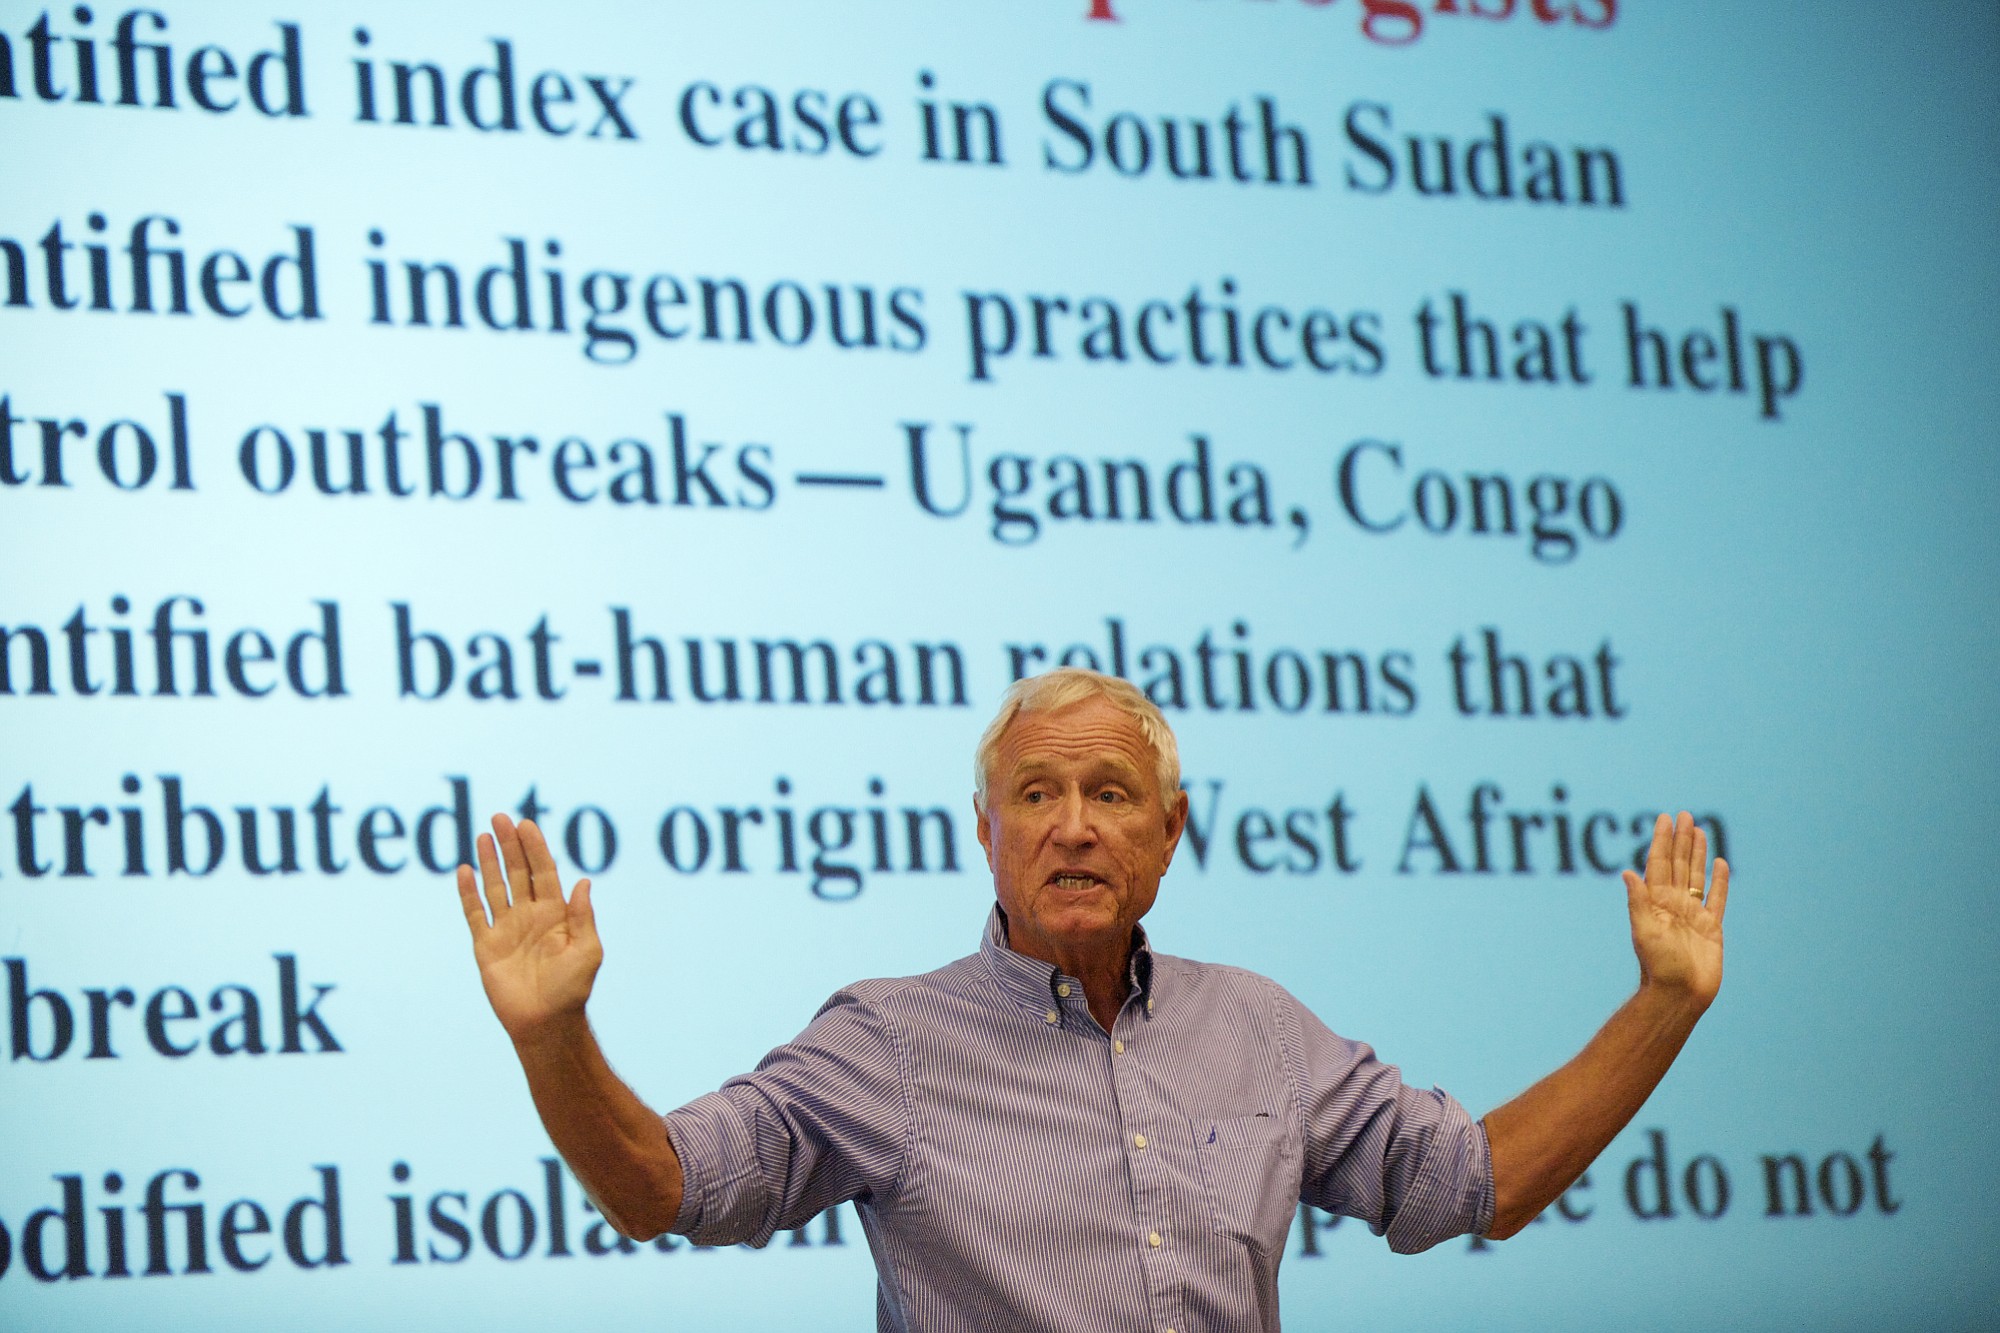 Anthropologist Barry Hewlett of Washington State University discusses what we know about Ebola - including the human factors that promote its spread - during a talk at WSU Vancouver on Tuesday.